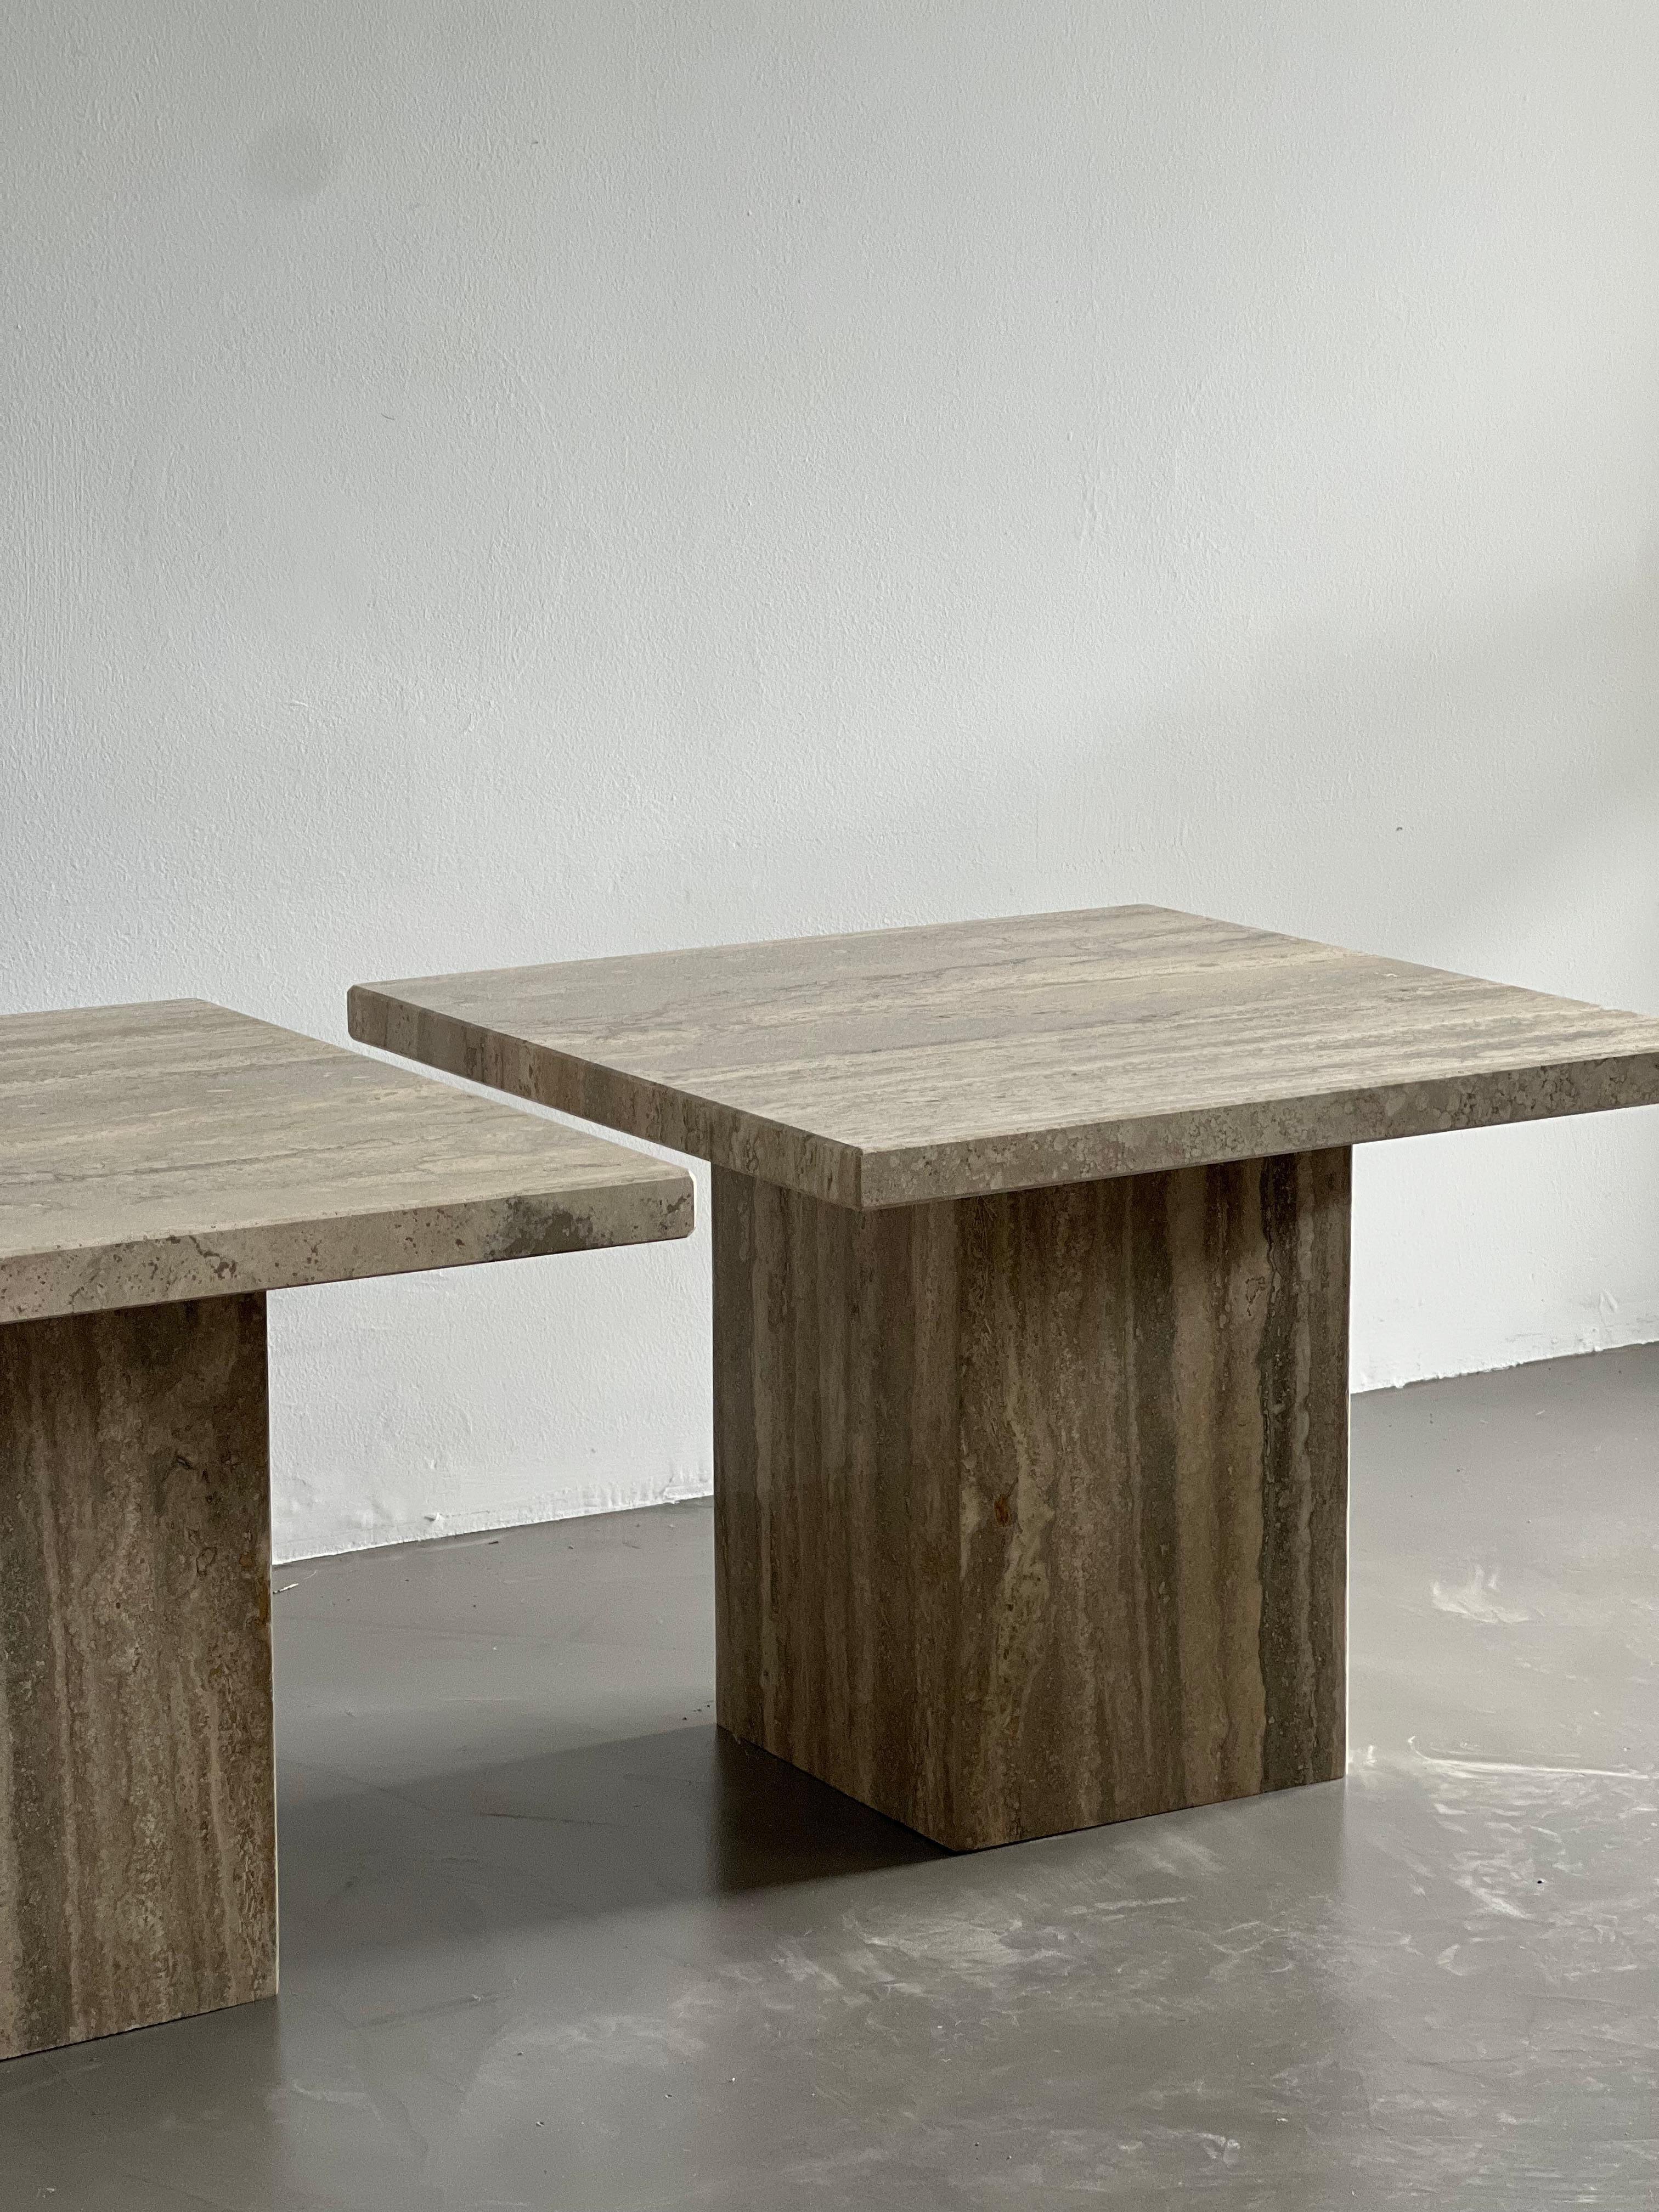 Set of Two Mid-Century Modern Side Tables in Travertine, Urban Wabi Style, Pair For Sale 2